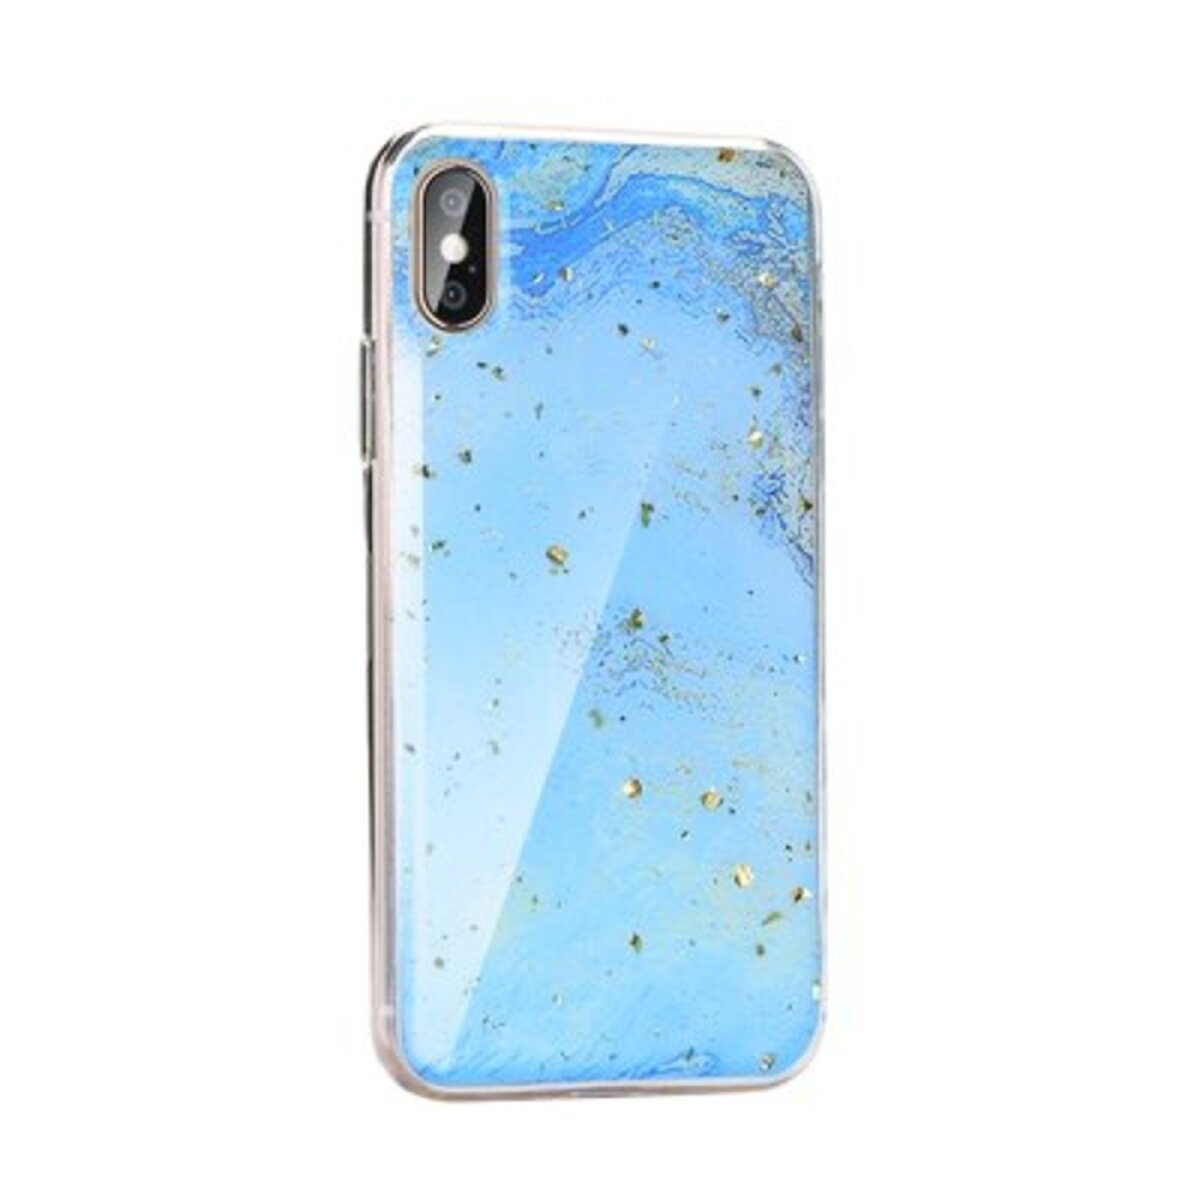 Galaxy MARBLE A40, 3, Not A40 Bookcover, design FORCELL Samsung, Case Galaxy available